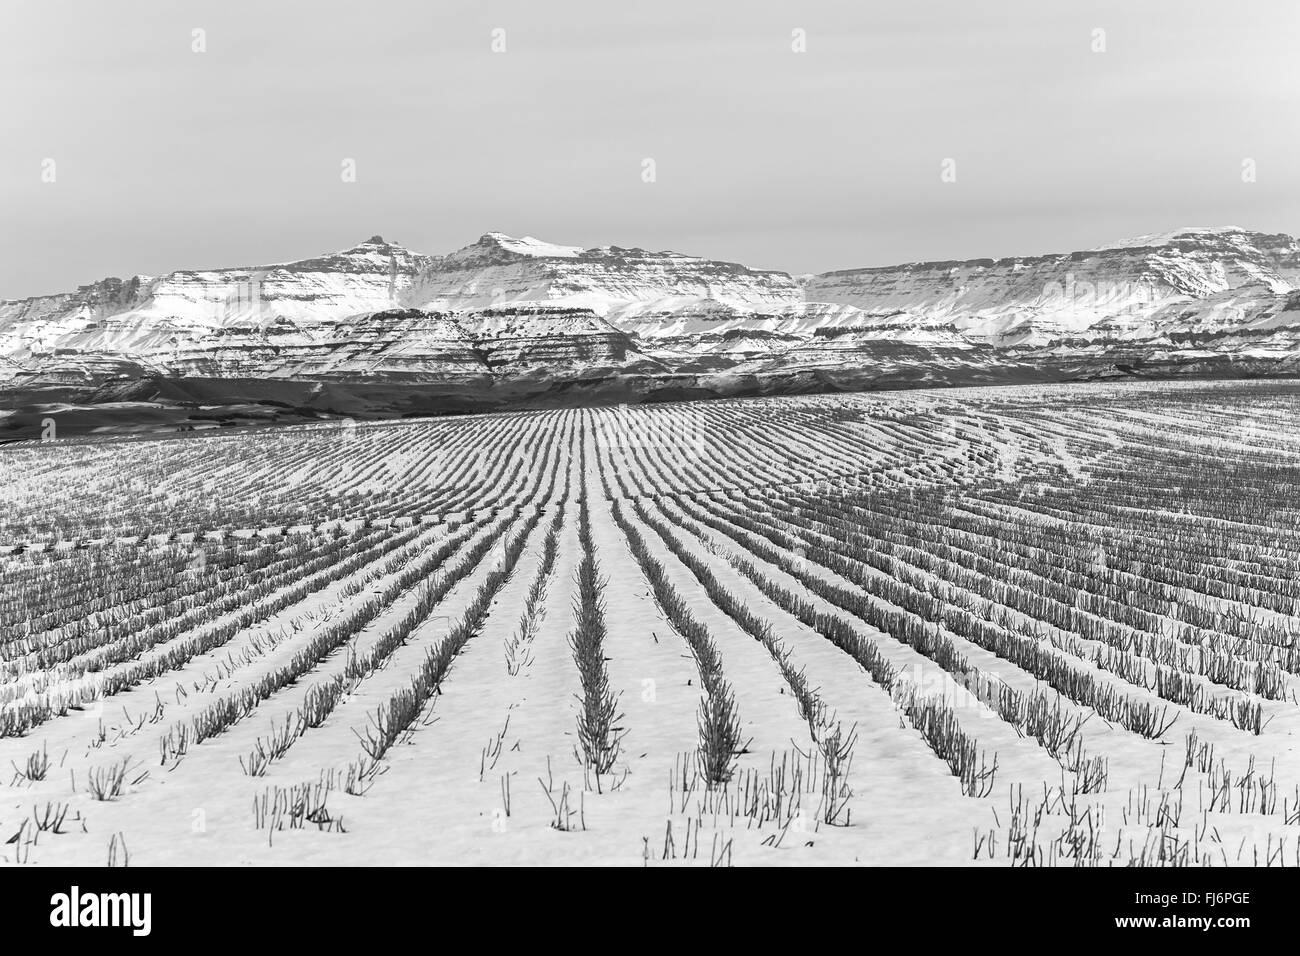 Winter mountains snow farming  landscape with crops harvested. Stock Photo